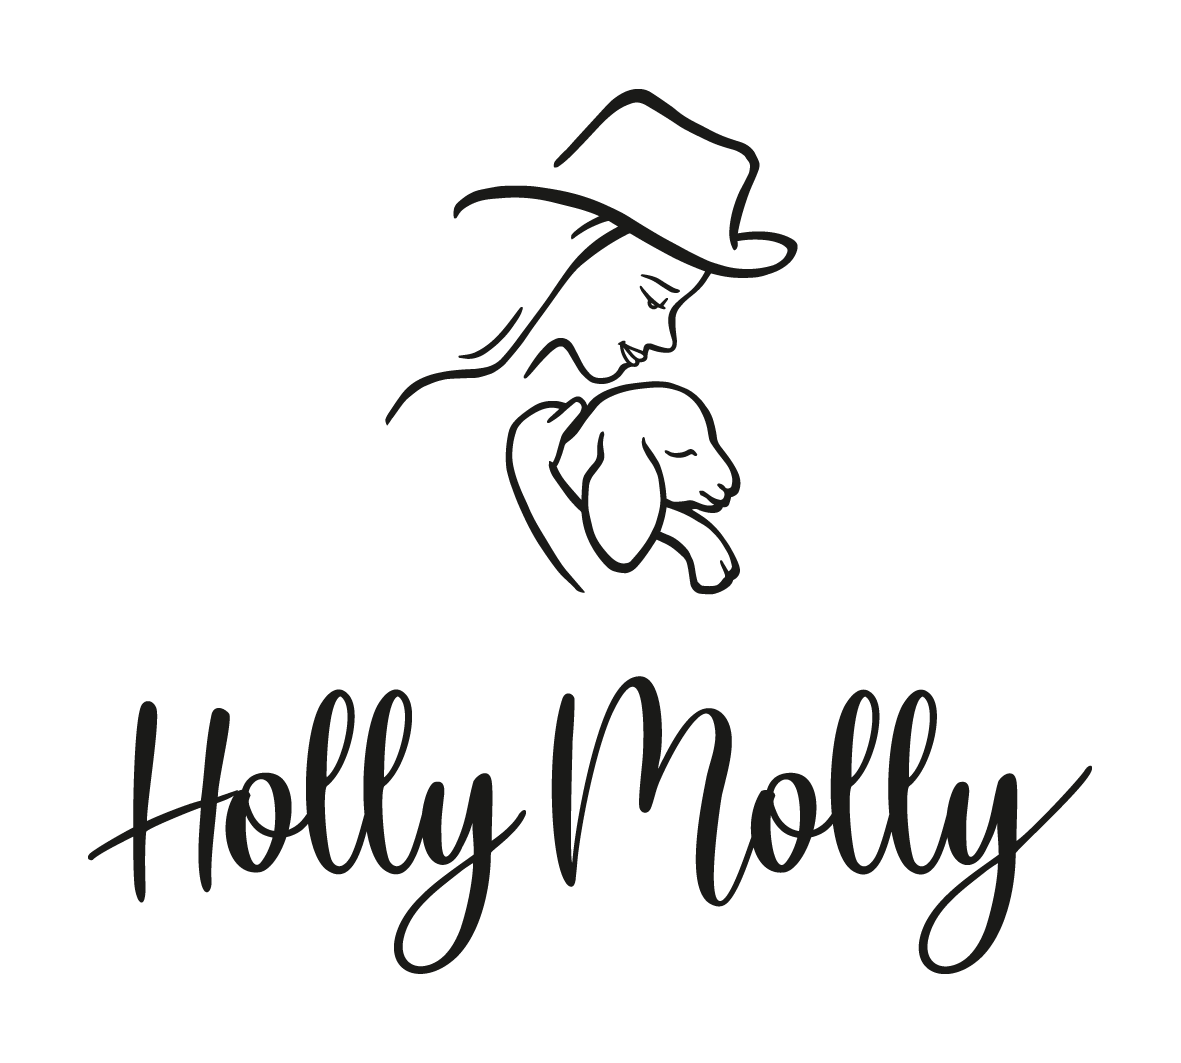 Holly Molly/ LanEsters GmbH